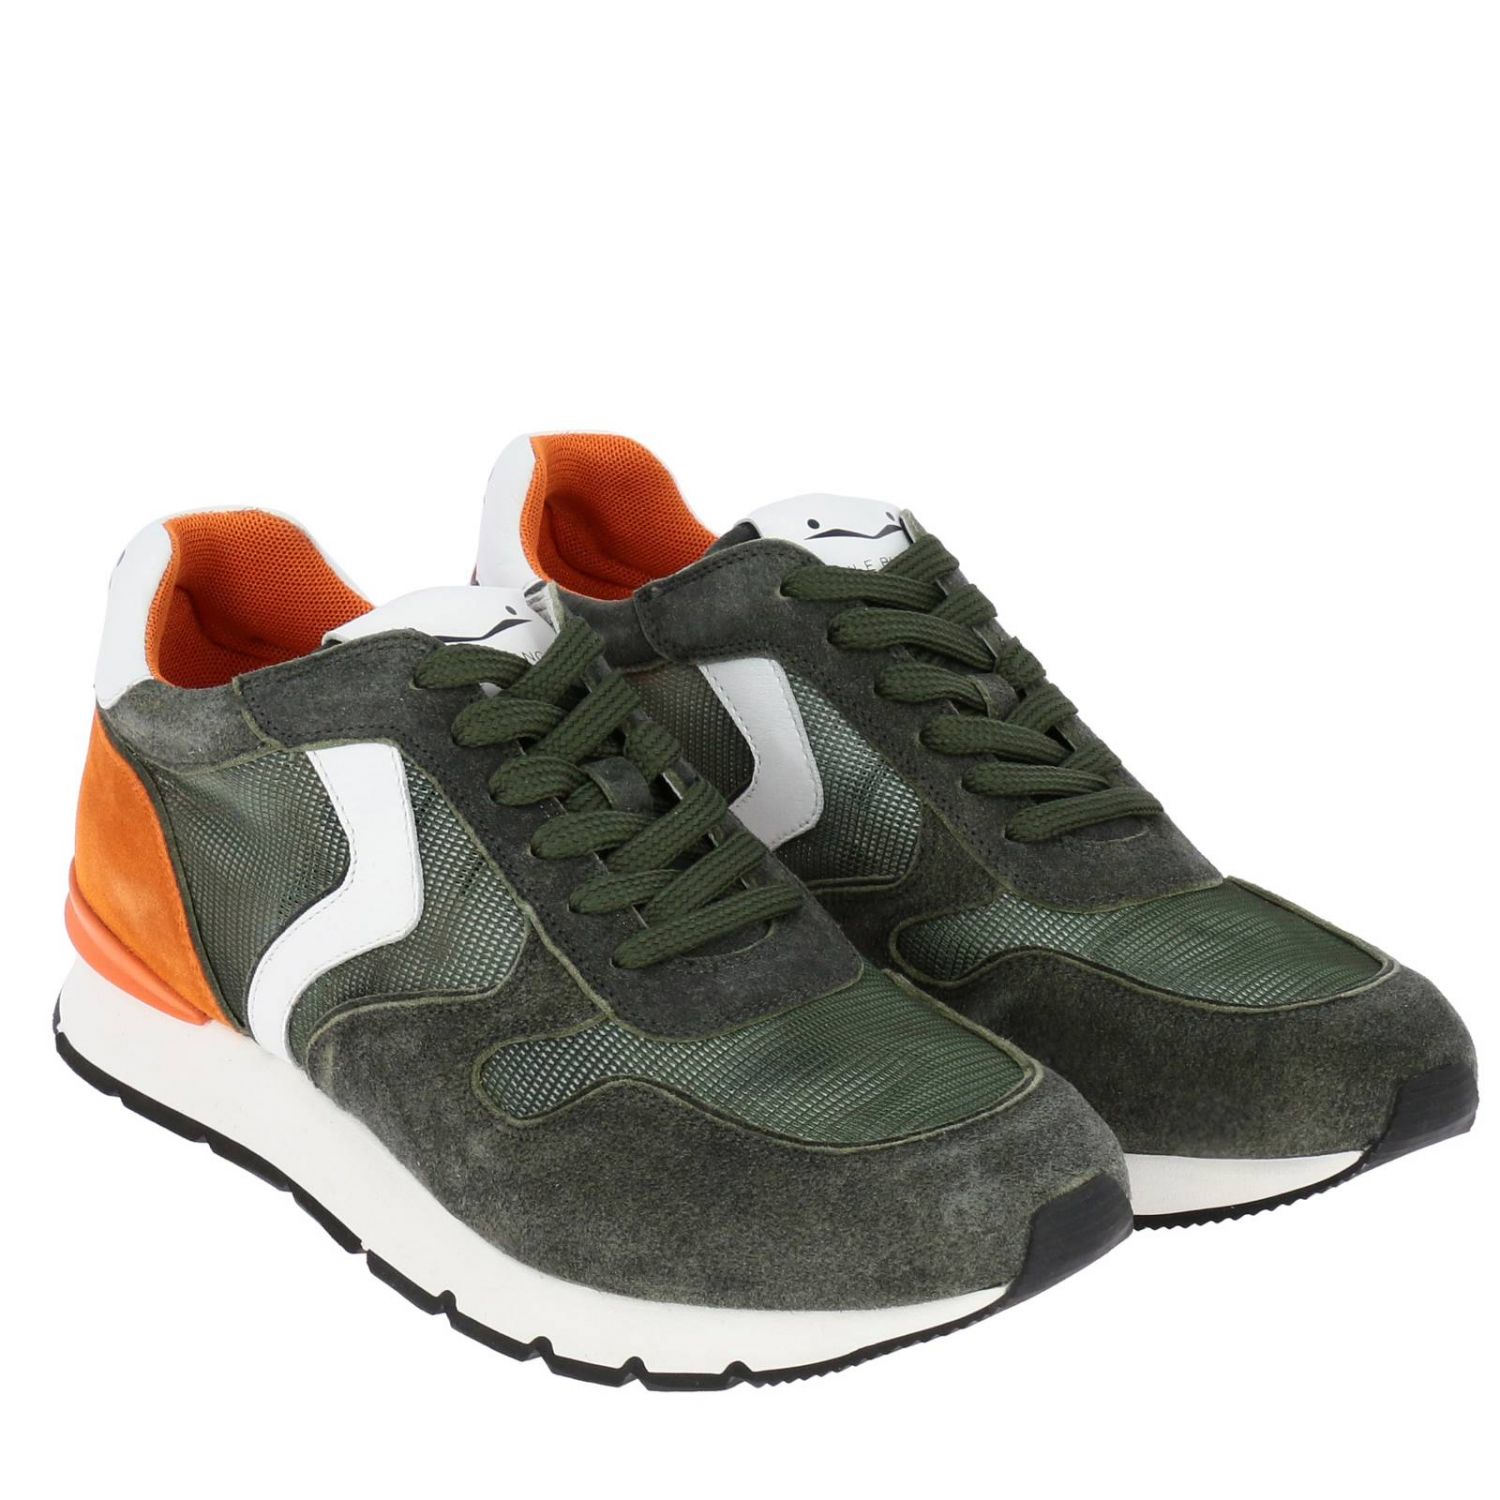 Voile Blanche Outlet: Sneakers men - Military | Sneakers Voile Blanche ...